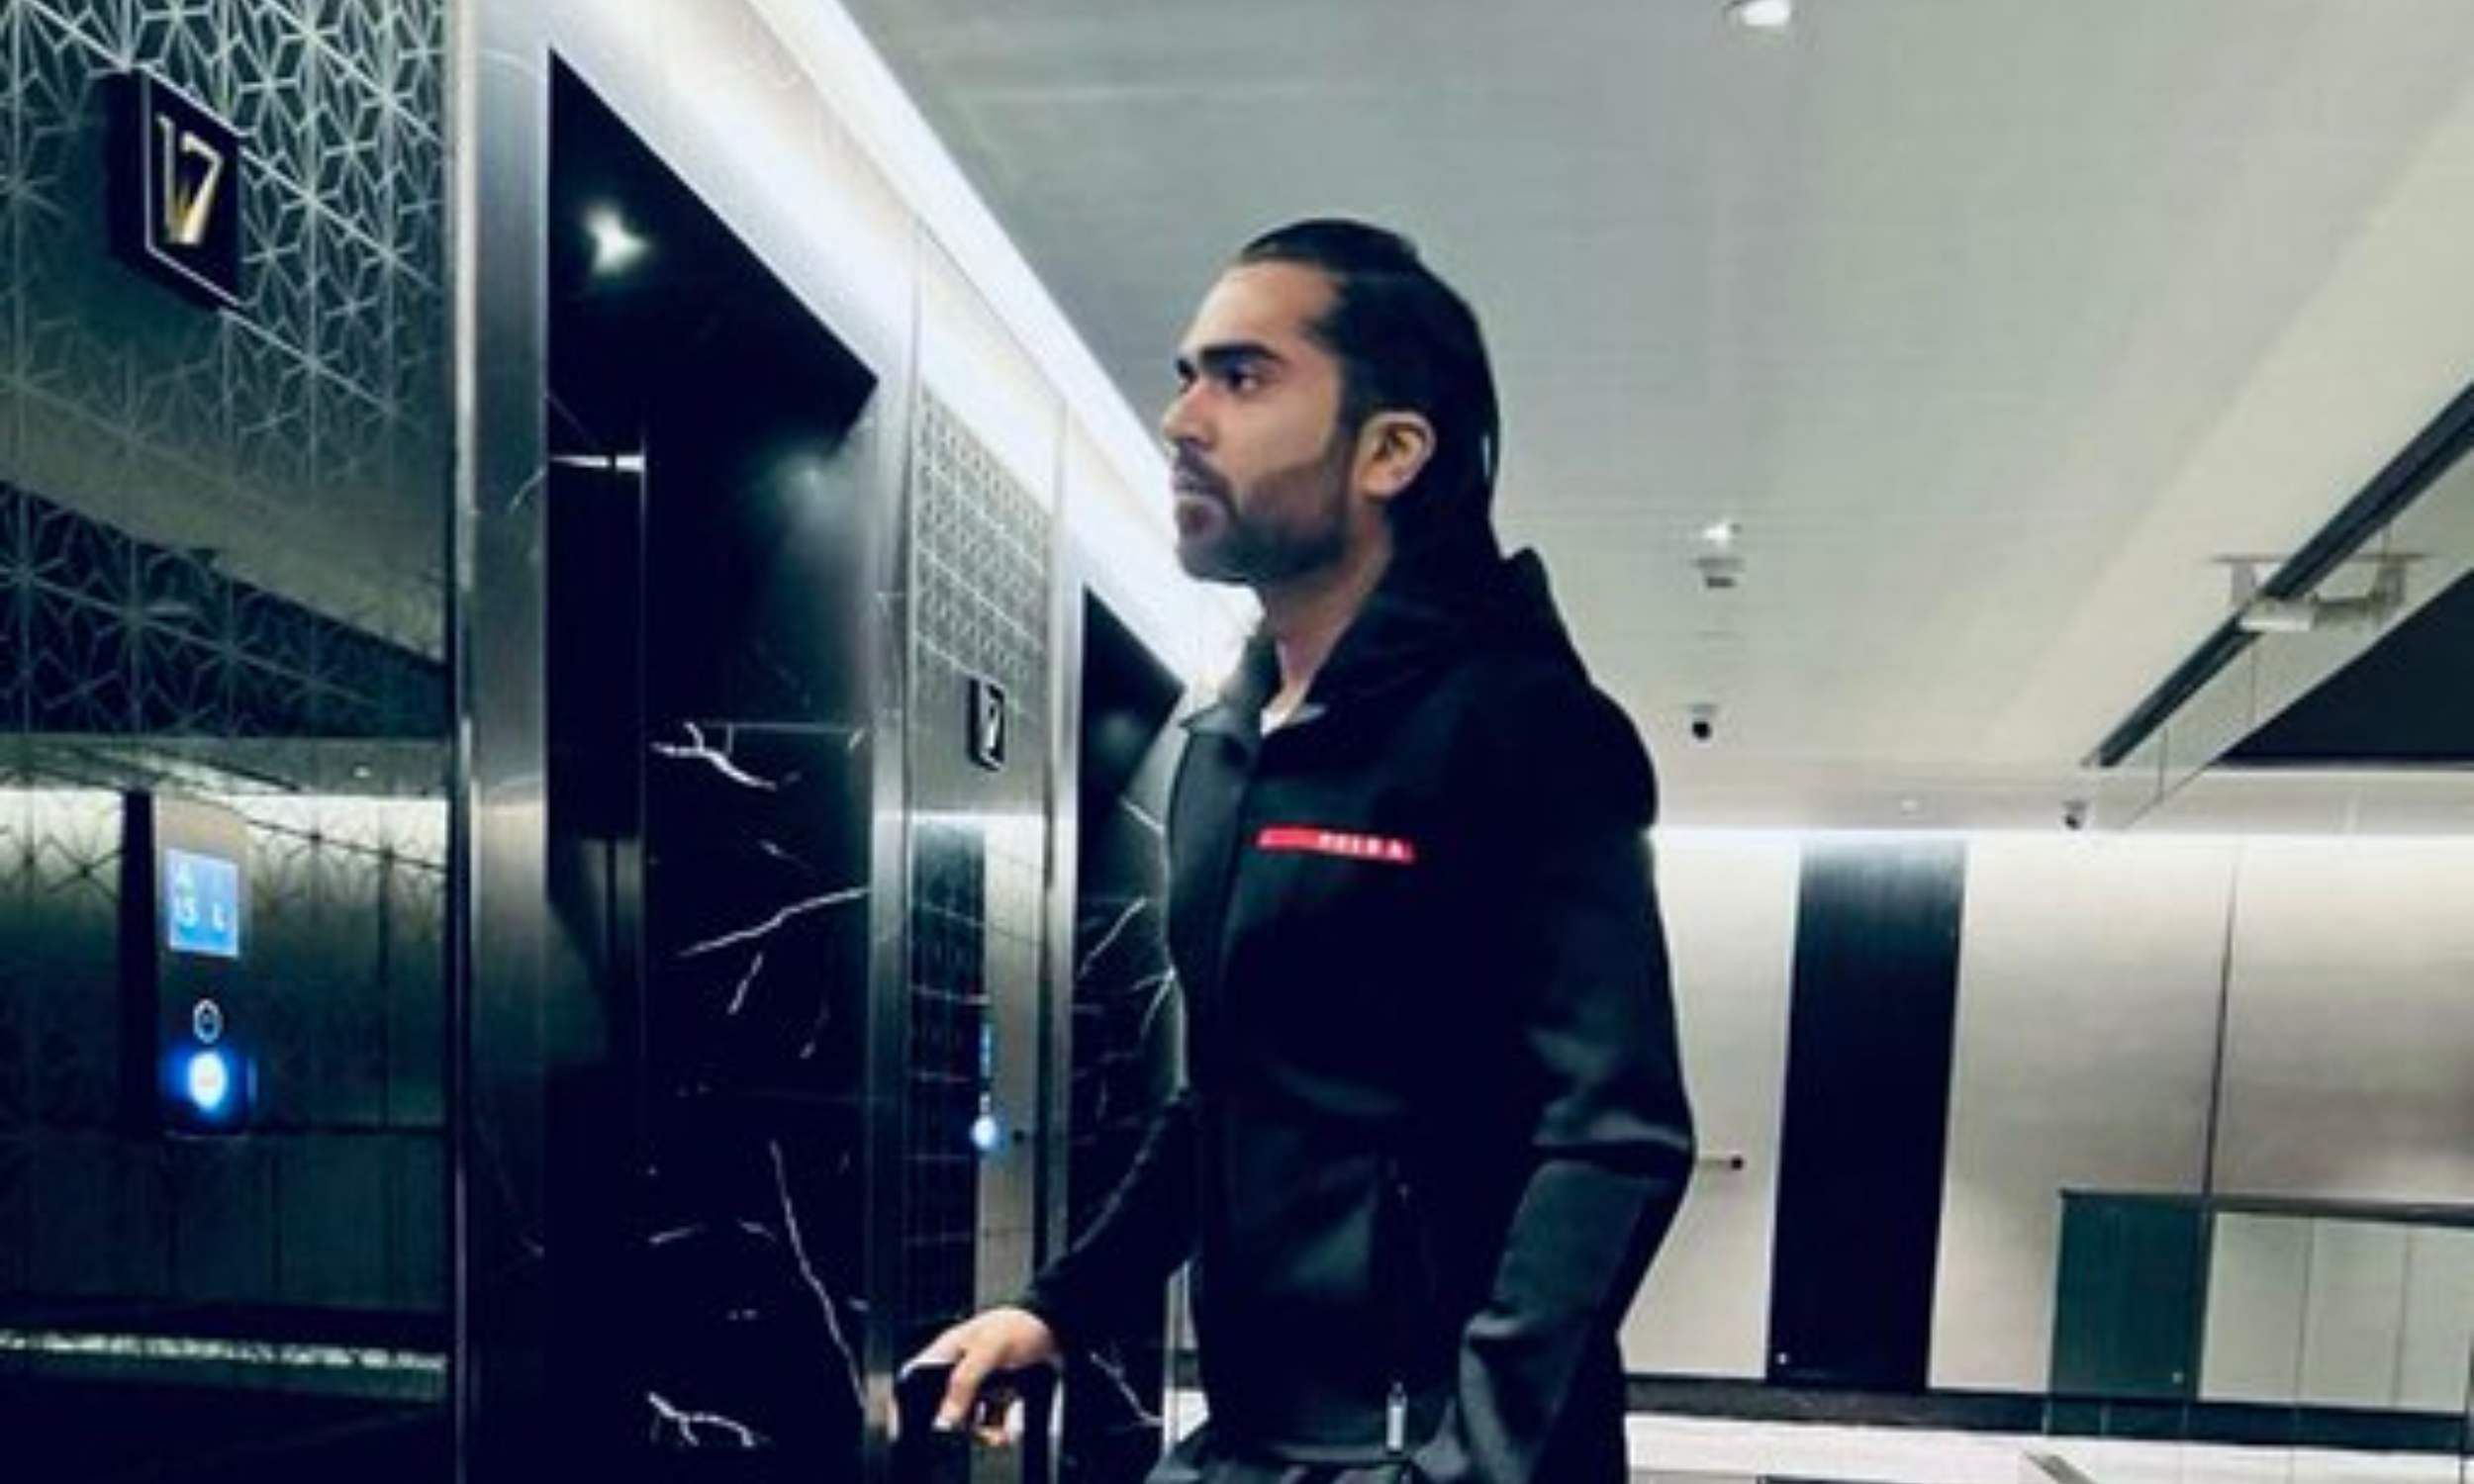 Actor Silambarasan's new look leaves netizens in awe